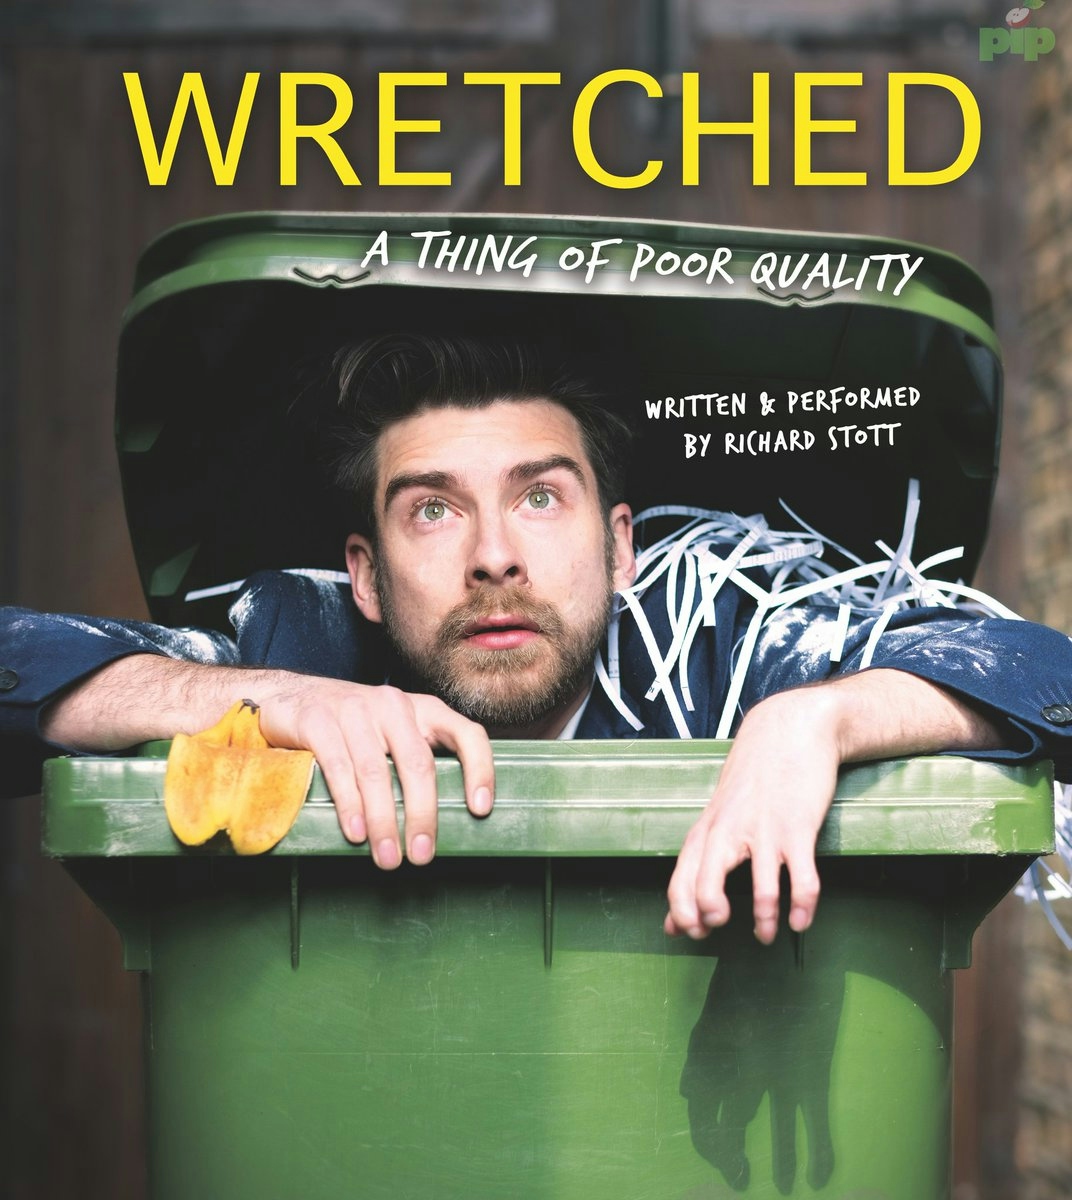 Poster for ‘Wretched’ by Richard Stott.